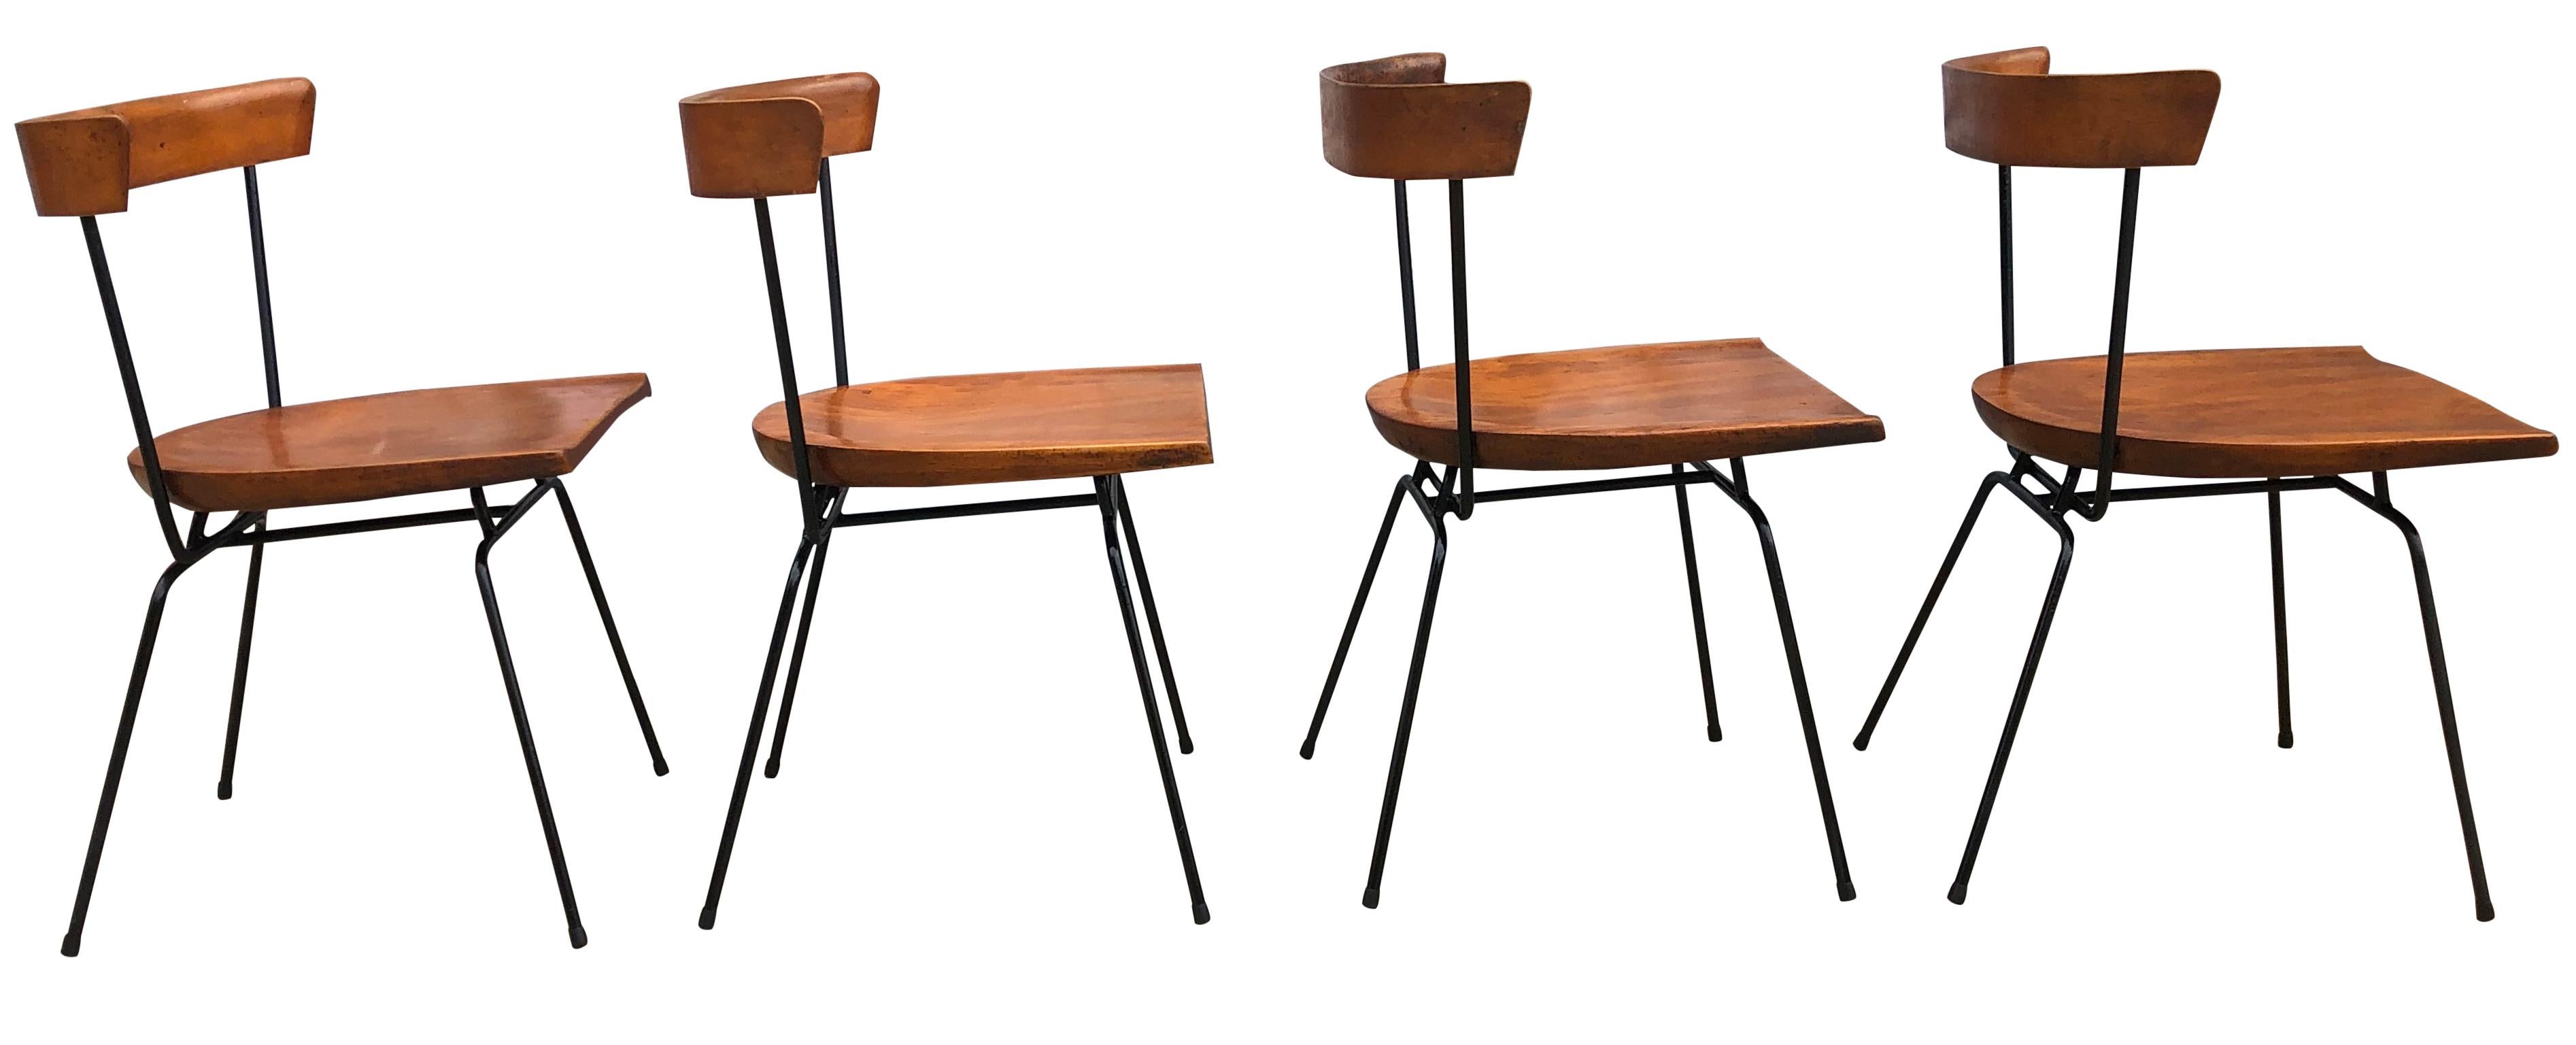 Four all original rare midcentury maple Paul McCobb Planner Group #1535 iron side dining chairs. Solid maple seat and curved back on Iron base. Original vintage condition. Original brown tobacco finish. These chairs are marked Paul McCobb by